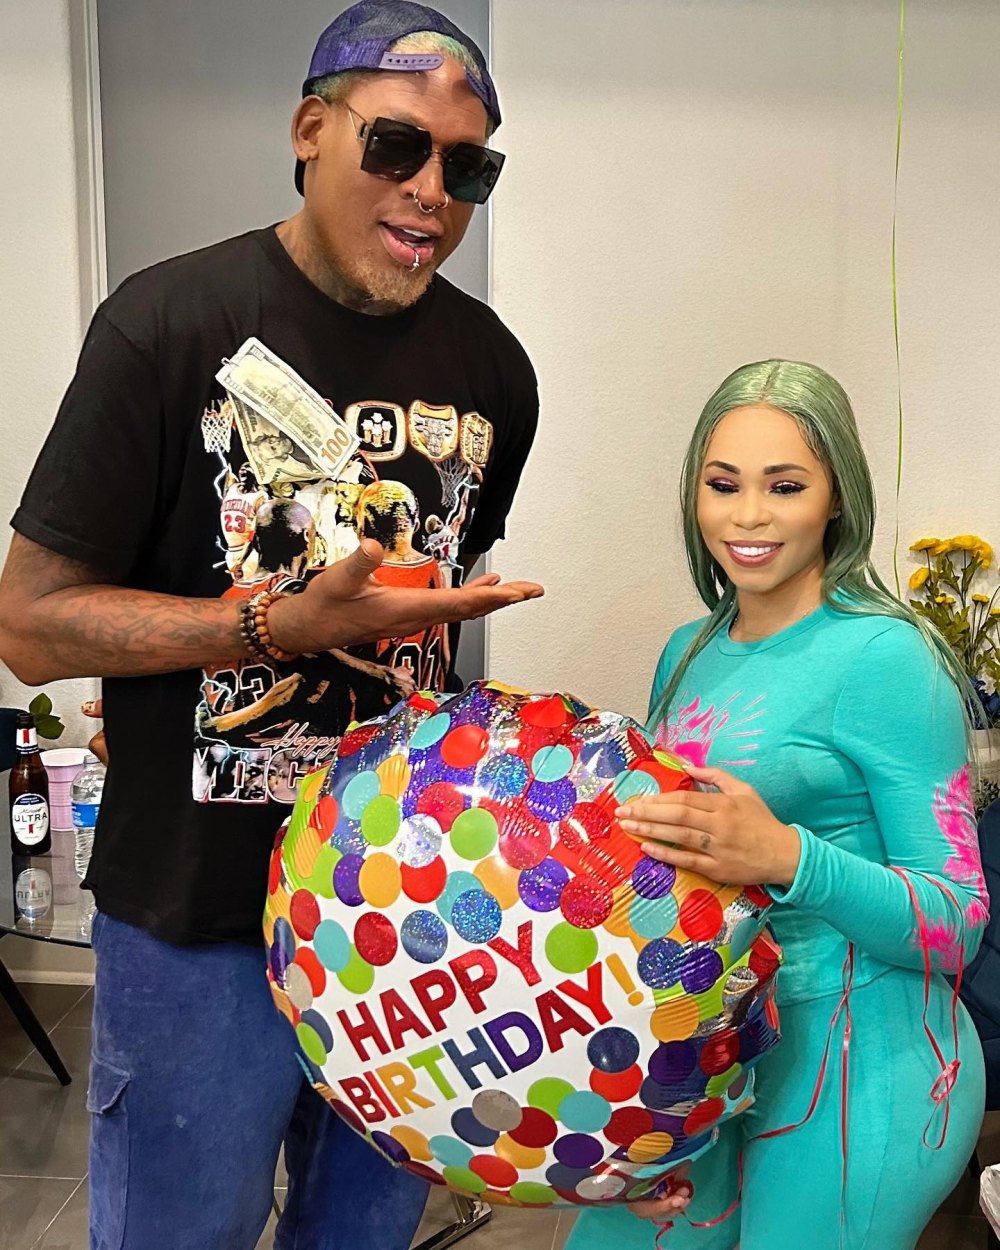 Dennis Rodman, 62, Inks Portrait of Girlfriend Yella Yella, 31, on His Face: Inside Her Reaction to the Tattoo